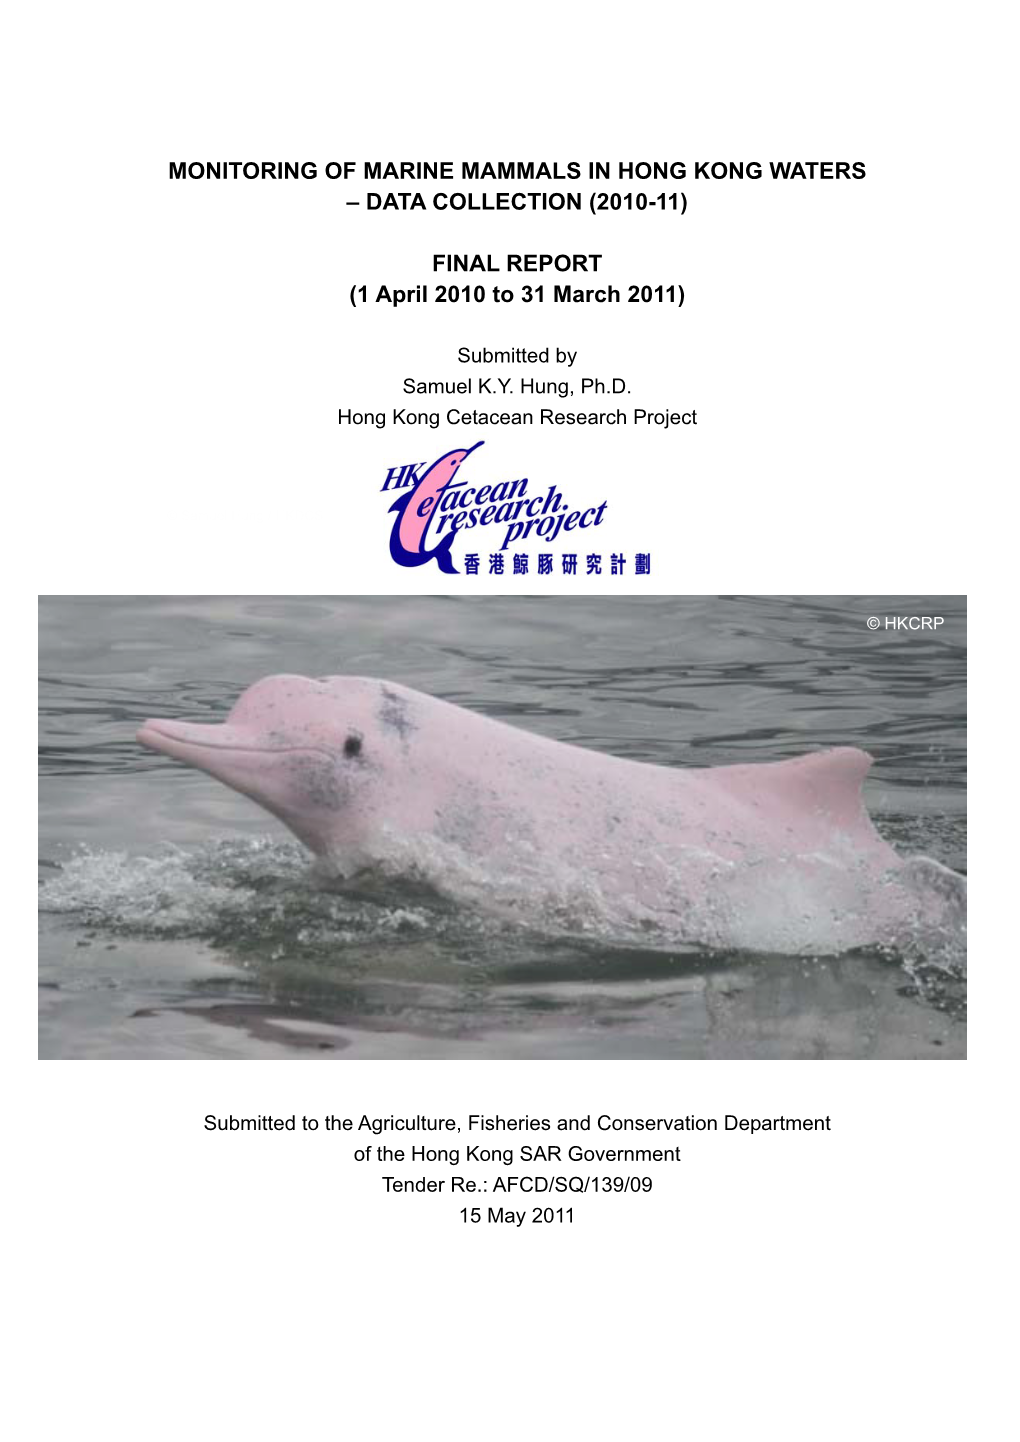 Monitoring of Chinese White Dolphins (Sousa Chinensis) in Hong Kong Waters – Data Collection: Final Report (2006-07)